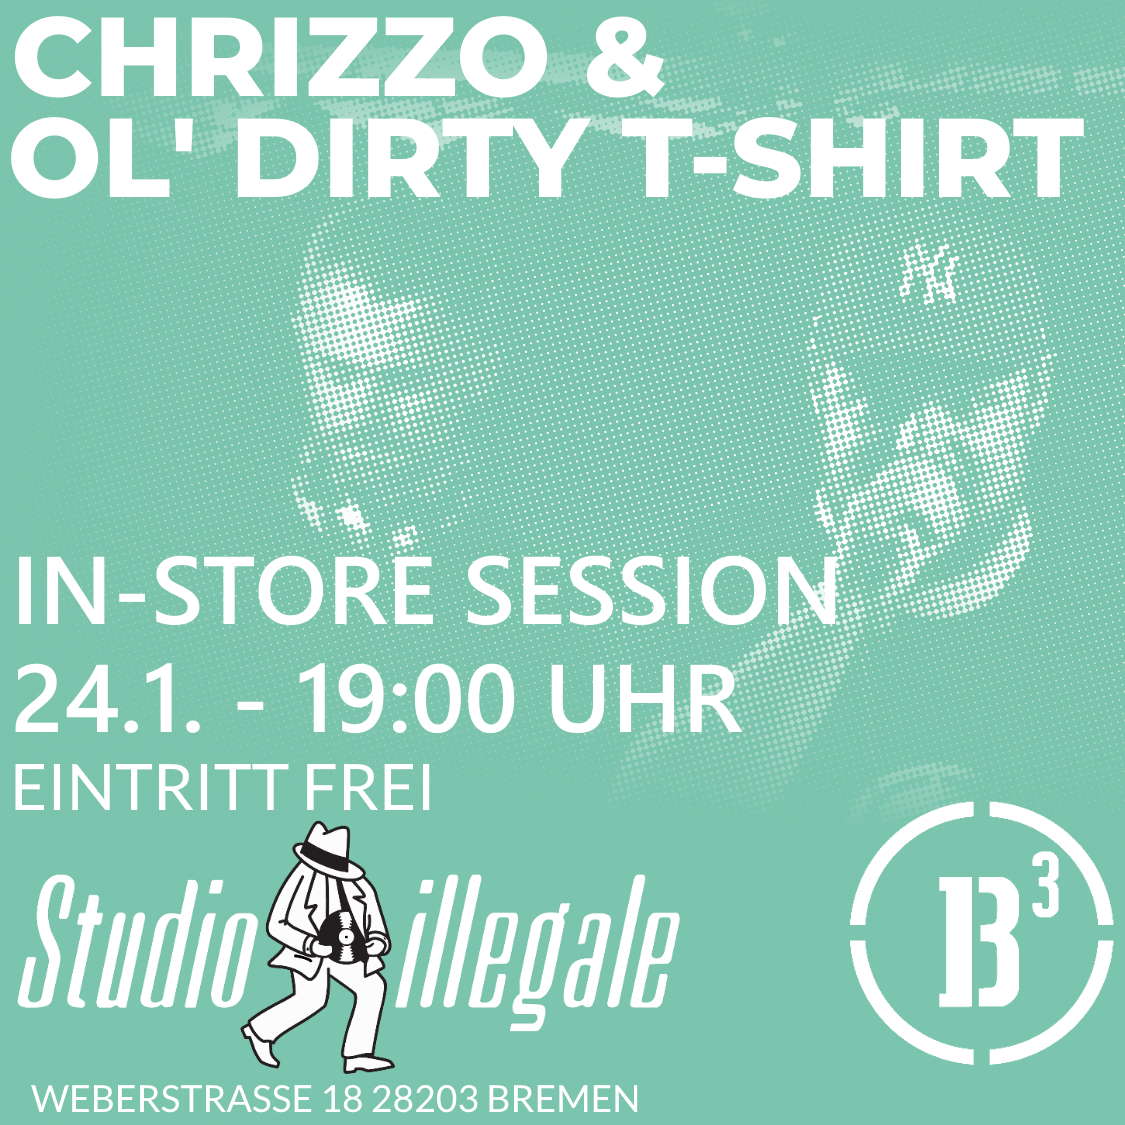 Chrizzo & Ol‘ Dirty T-Shirt @ Studio Illegale